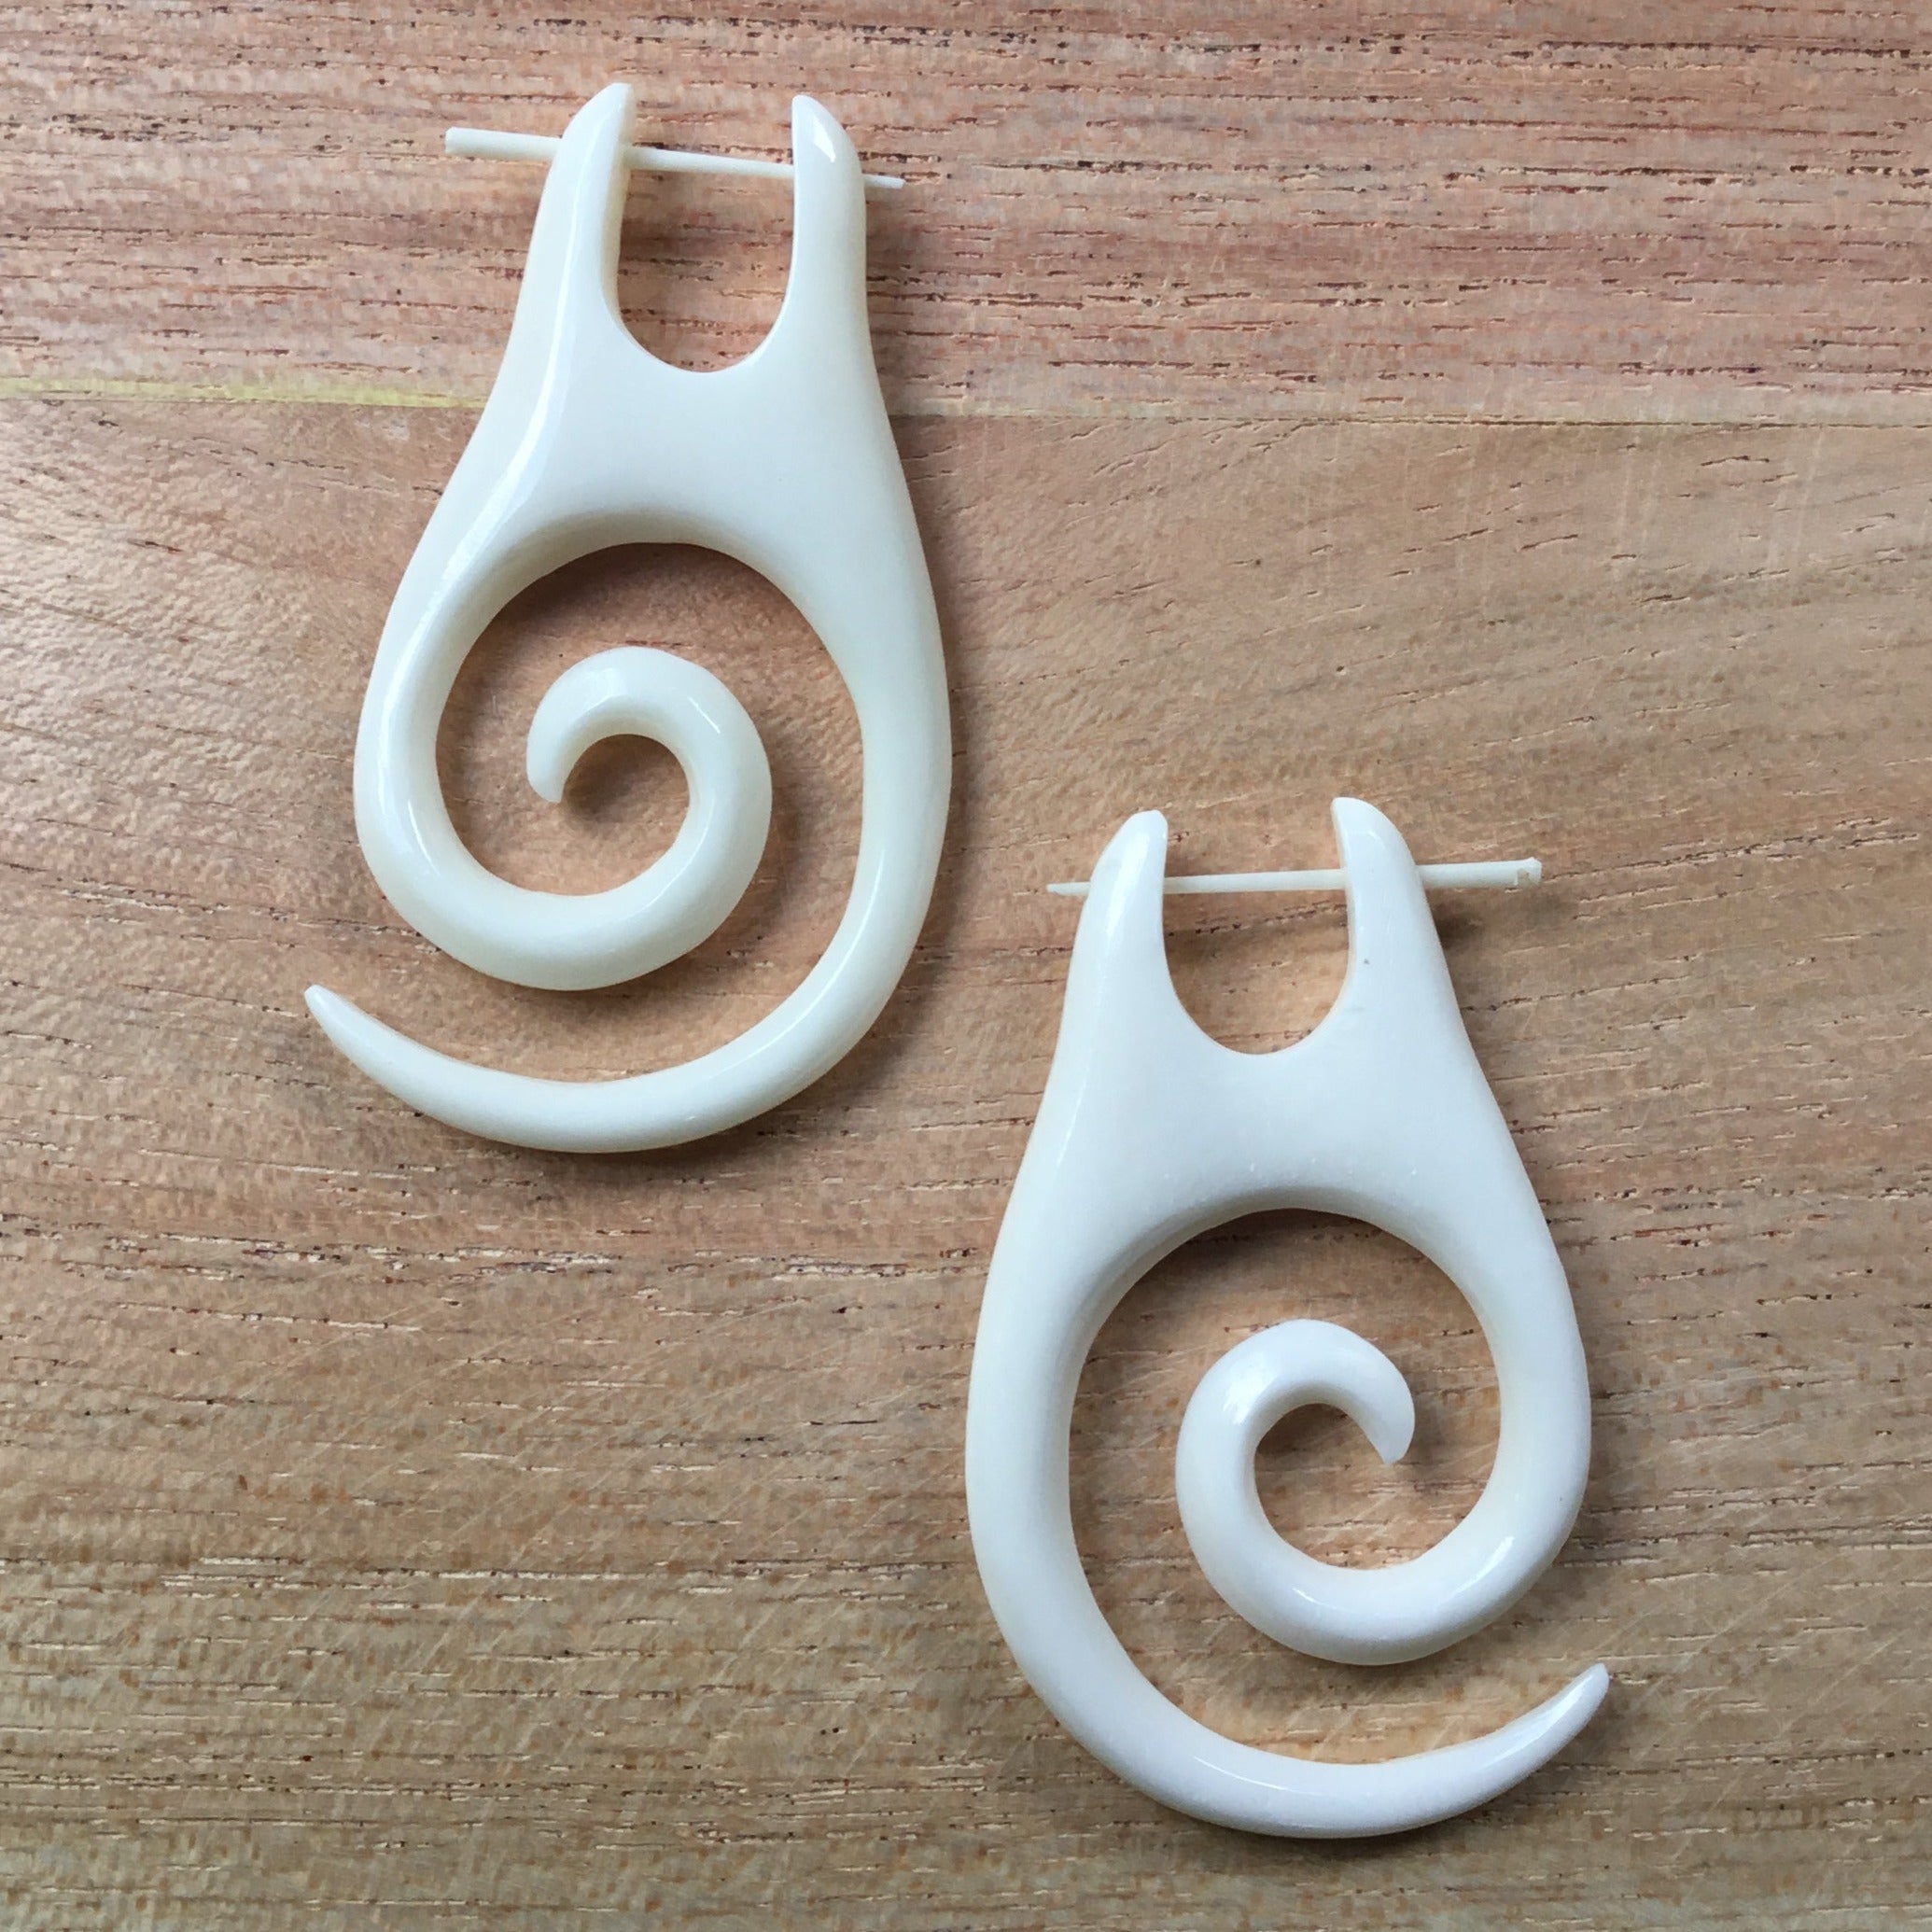 Large Spiral Hoop Earrings | Sterling Silver USA | Light Years Jewelry